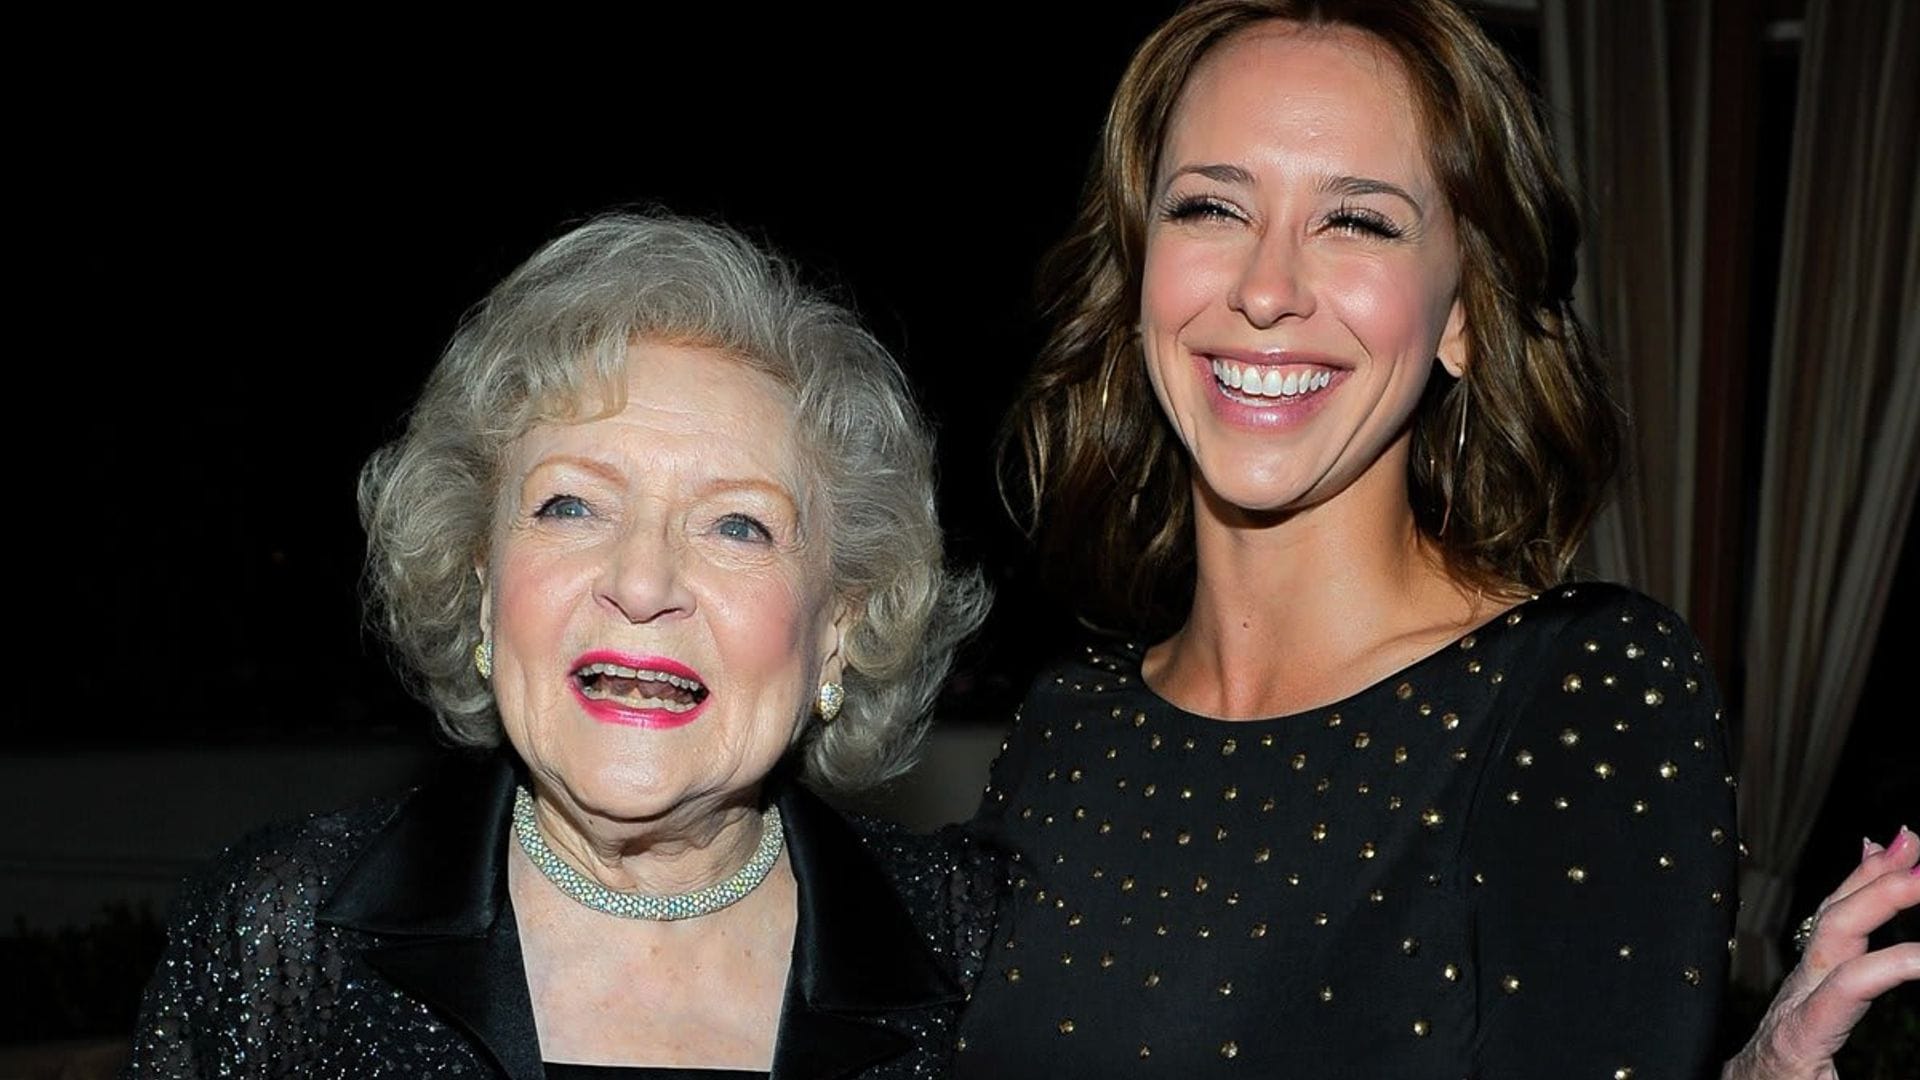 Jennifer Love Hewitt and Betty White at TV Land's "Hot In Cleveland" And "Retired At 35" Premiere Party - Inside